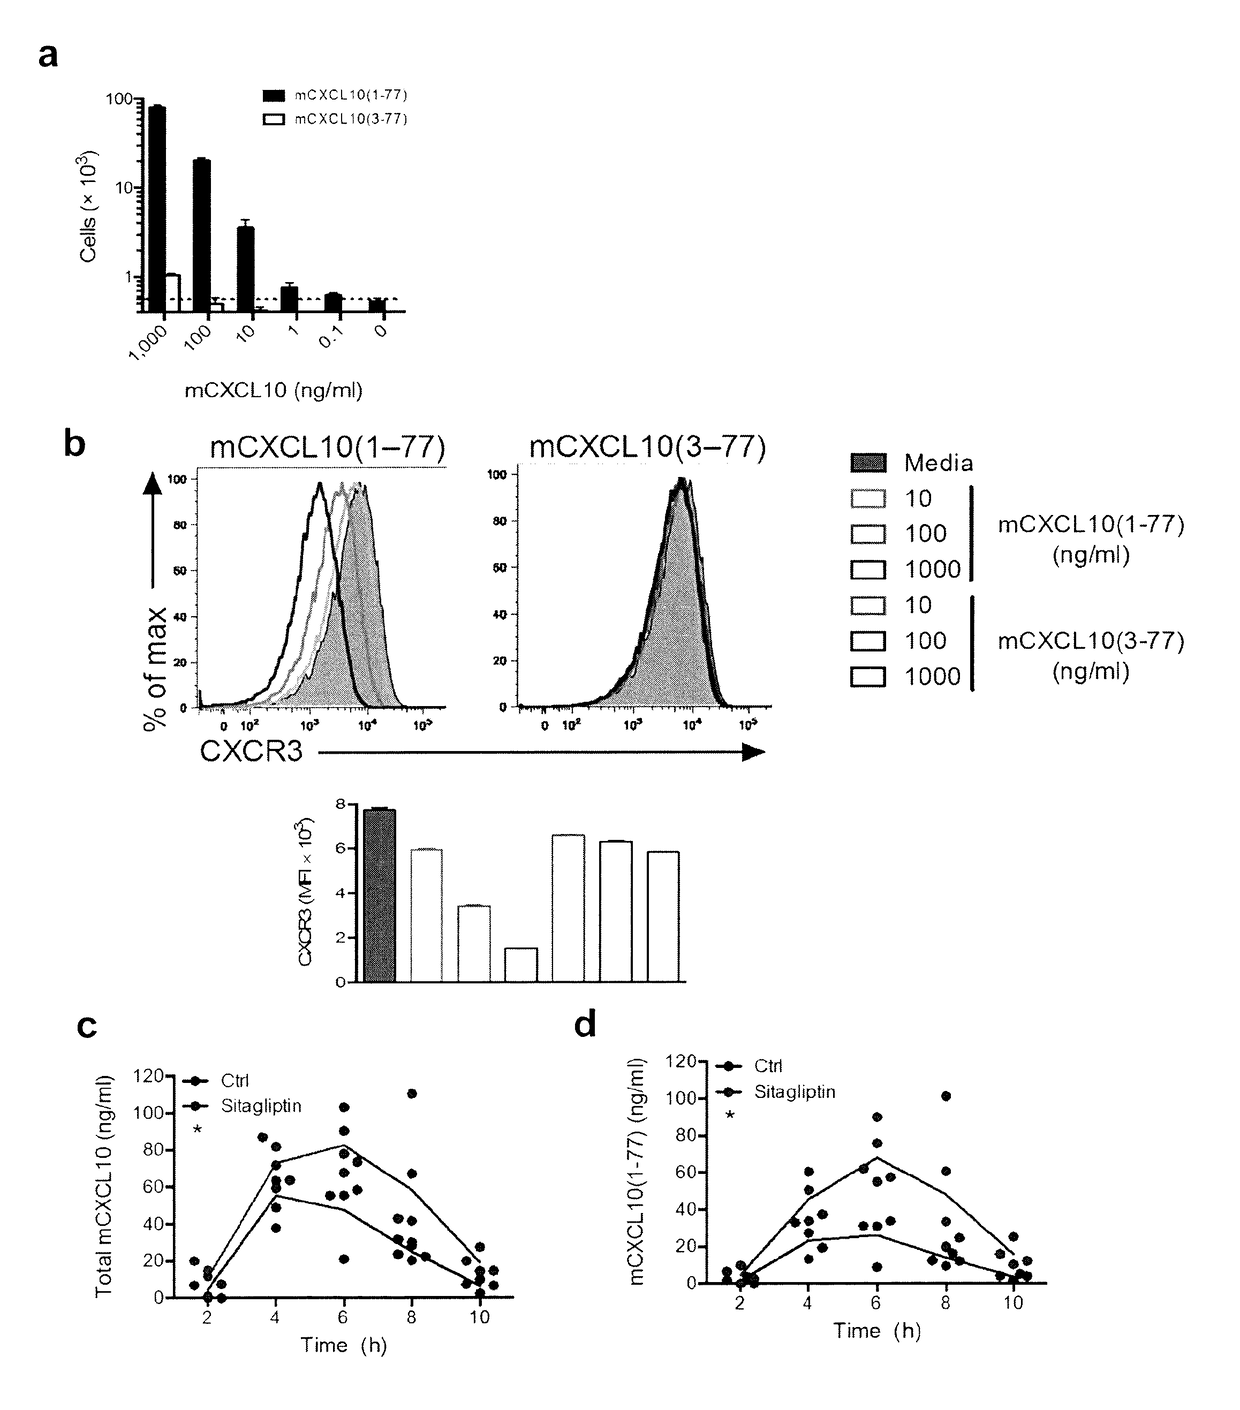 Dipeptidylpeptidase 4 inhibition enhances lymphocyte trafficking, improving both naturally occurring tumor immunity and immunotherapy